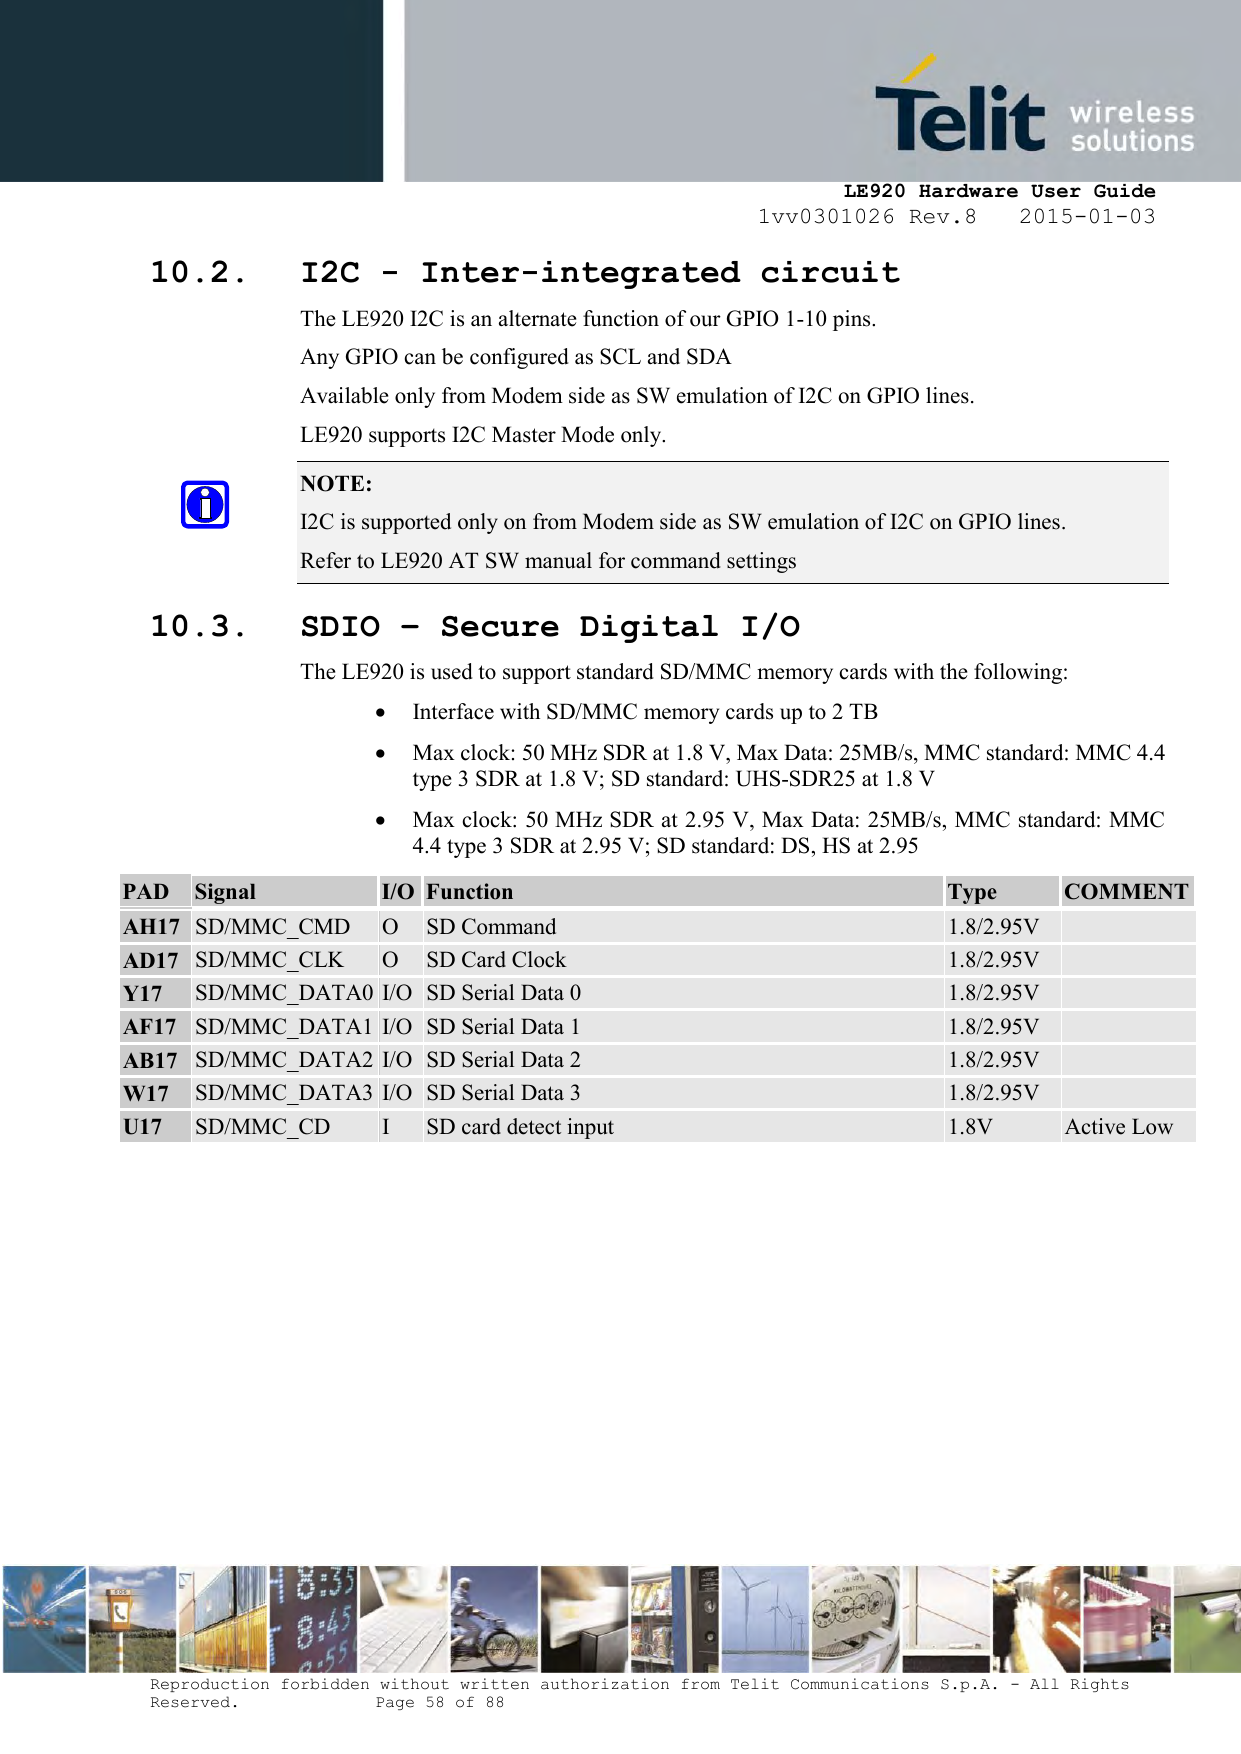     LE920 Hardware User Guide 1vv0301026 Rev.8   2015-01-03 Reproduction forbidden without written authorization from Telit Communications S.p.A. - All Rights Reserved.    Page 58 of 88  10.2. I2C - Inter-integrated circuit The LE920 I2C is an alternate function of our GPIO 1-10 pins. Any GPIO can be configured as SCL and SDA Available only from Modem side as SW emulation of I2C on GPIO lines. LE920 supports I2C Master Mode only. NOTE:  I2C is supported only on from Modem side as SW emulation of I2C on GPIO lines. Refer to LE920 AT SW manual for command settings 10.3. SDIO – Secure Digital I/O The LE920 is used to support standard SD/MMC memory cards with the following:    Interface with SD/MMC memory cards up to 2 TB  Max clock: 50 MHz SDR at 1.8 V, Max Data: 25MB/s, MMC standard: MMC 4.4 type 3 SDR at 1.8 V; SD standard: UHS-SDR25 at 1.8 V  Max clock: 50 MHz SDR at 2.95 V, Max Data: 25MB/s, MMC standard: MMC 4.4 type 3 SDR at 2.95 V; SD standard: DS, HS at 2.95  PAD Signal I/O Function Type COMMENT  AH17 SD/MMC_CMD O SD Command 1.8/2.95V   AD17 SD/MMC_CLK O SD Card Clock 1.8/2.95V   Y17 SD/MMC_DATA0 I/O SD Serial Data 0 1.8/2.95V   AF17 SD/MMC_DATA1 I/O SD Serial Data 1 1.8/2.95V   AB17 SD/MMC_DATA2 I/O SD Serial Data 2 1.8/2.95V   W17 SD/MMC_DATA3 I/O SD Serial Data 3 1.8/2.95V   U17 SD/MMC_CD I SD card detect input 1.8V Active Low      